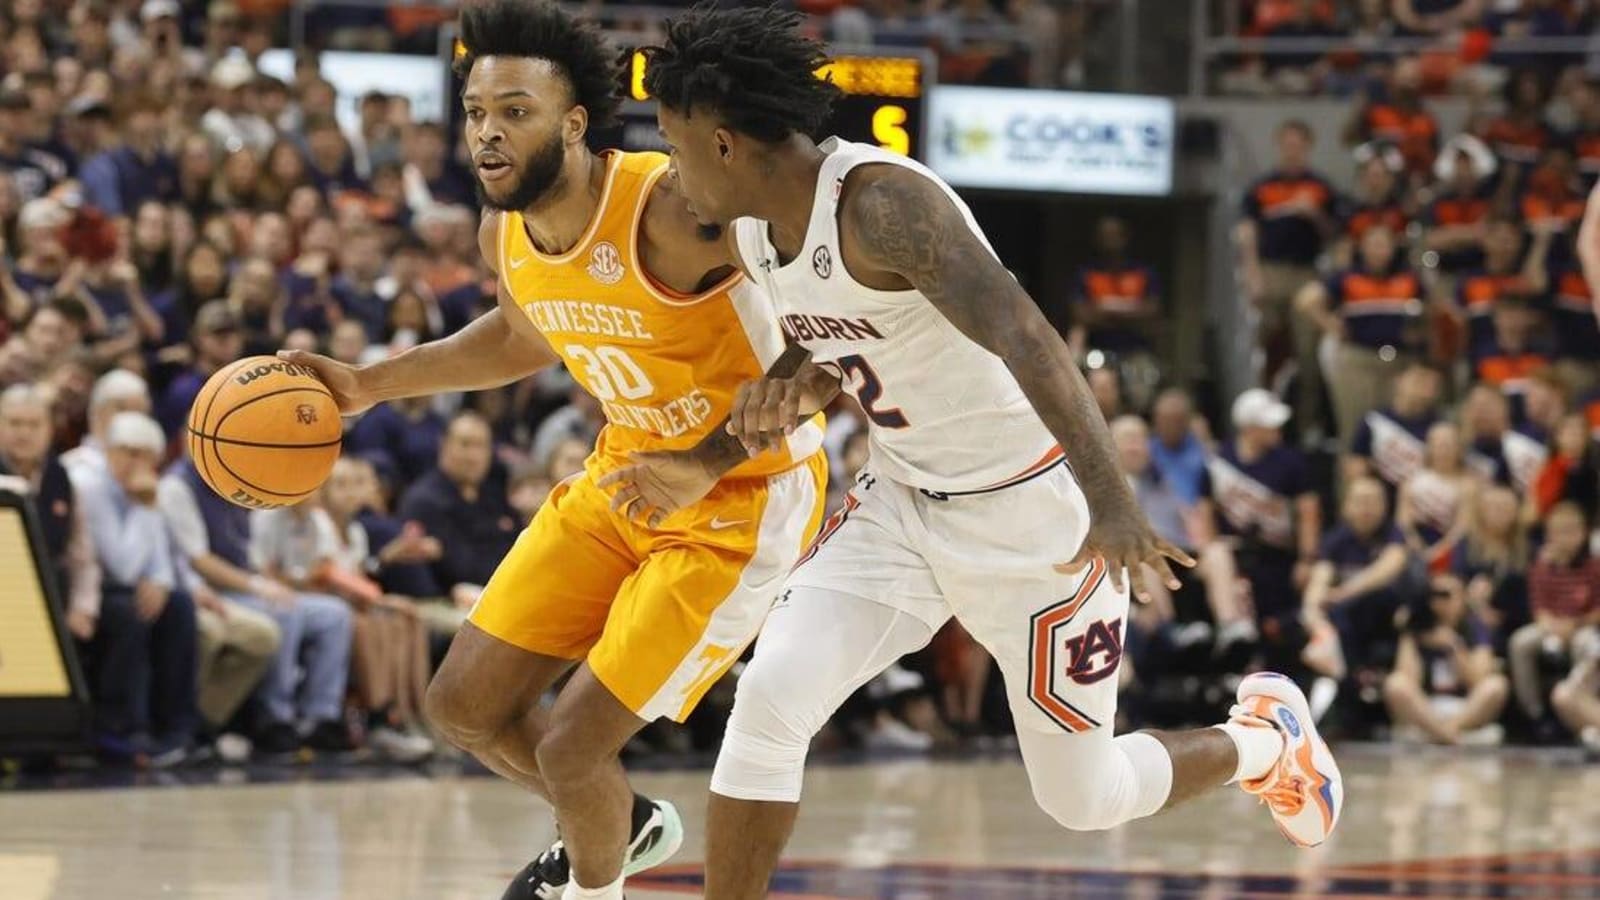 Wendell Green Jr. leads Auburn past No. 12 Tennessee